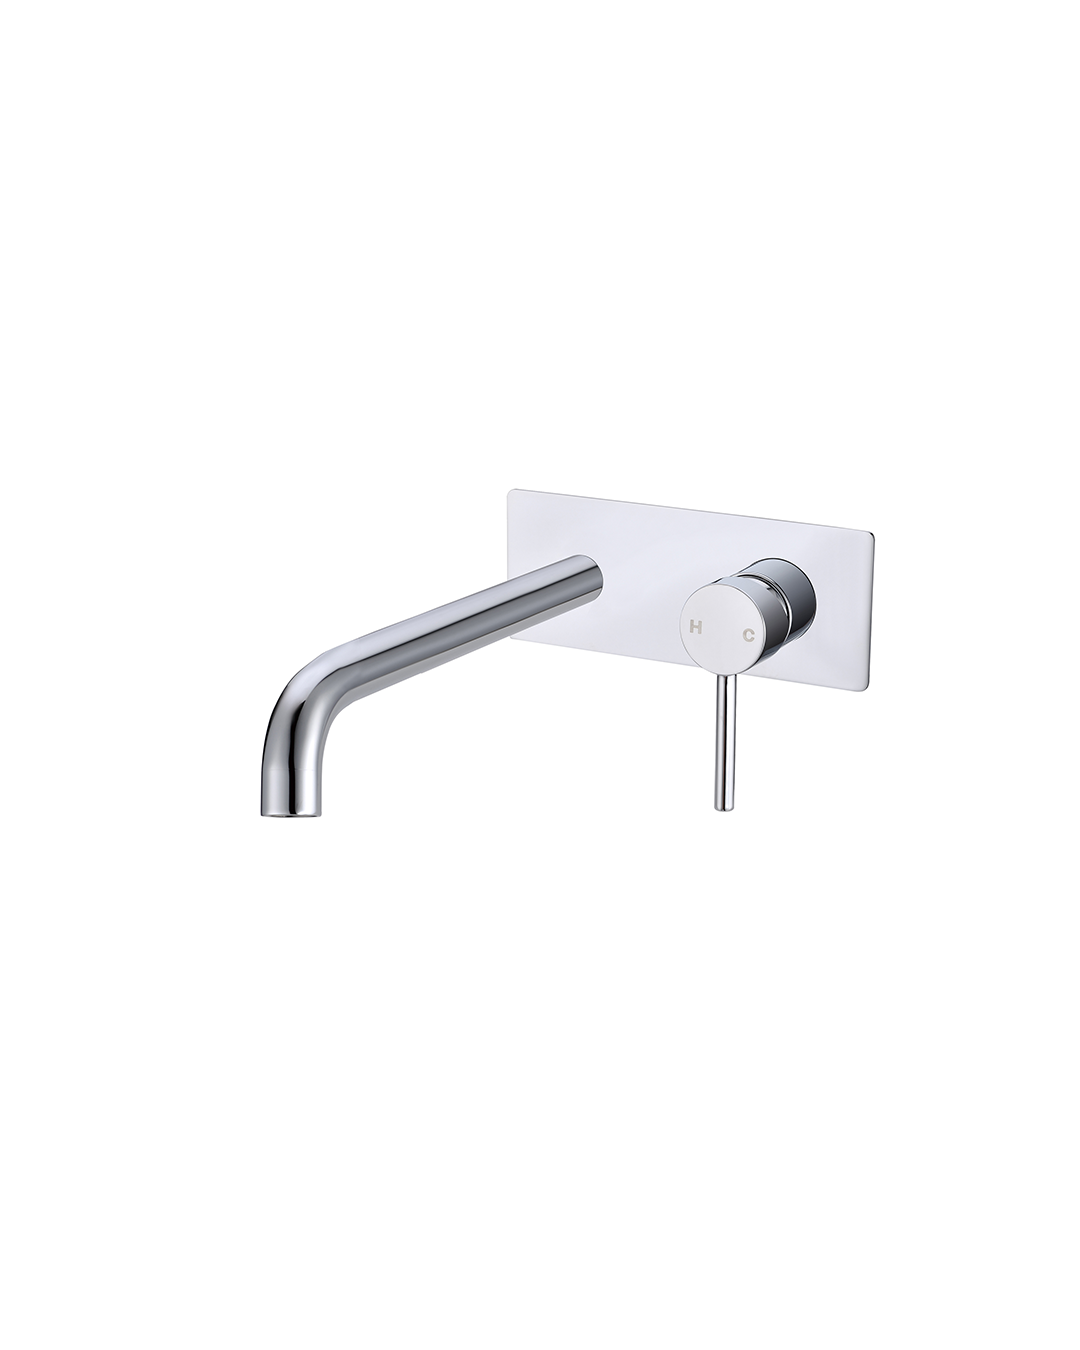 Pentro Wall Mixer with Spout